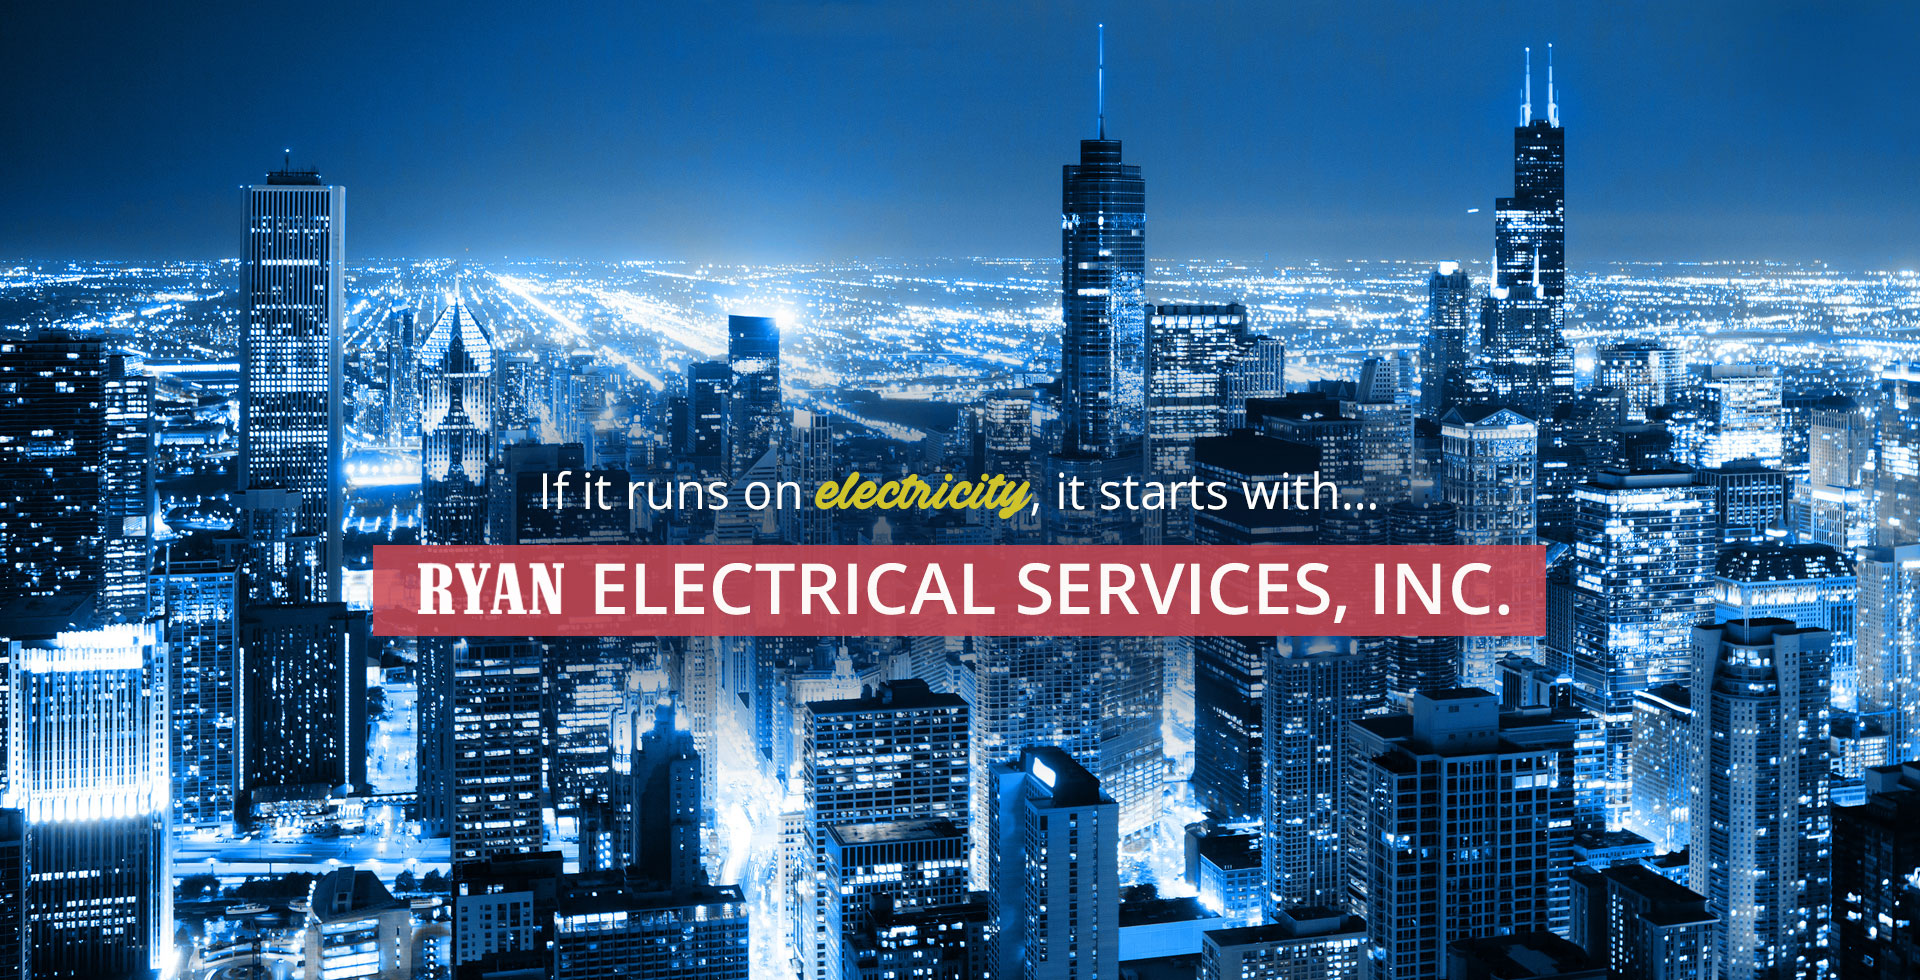 If it runs on electricity, it starts with Ryan Electrical Services, Inc.